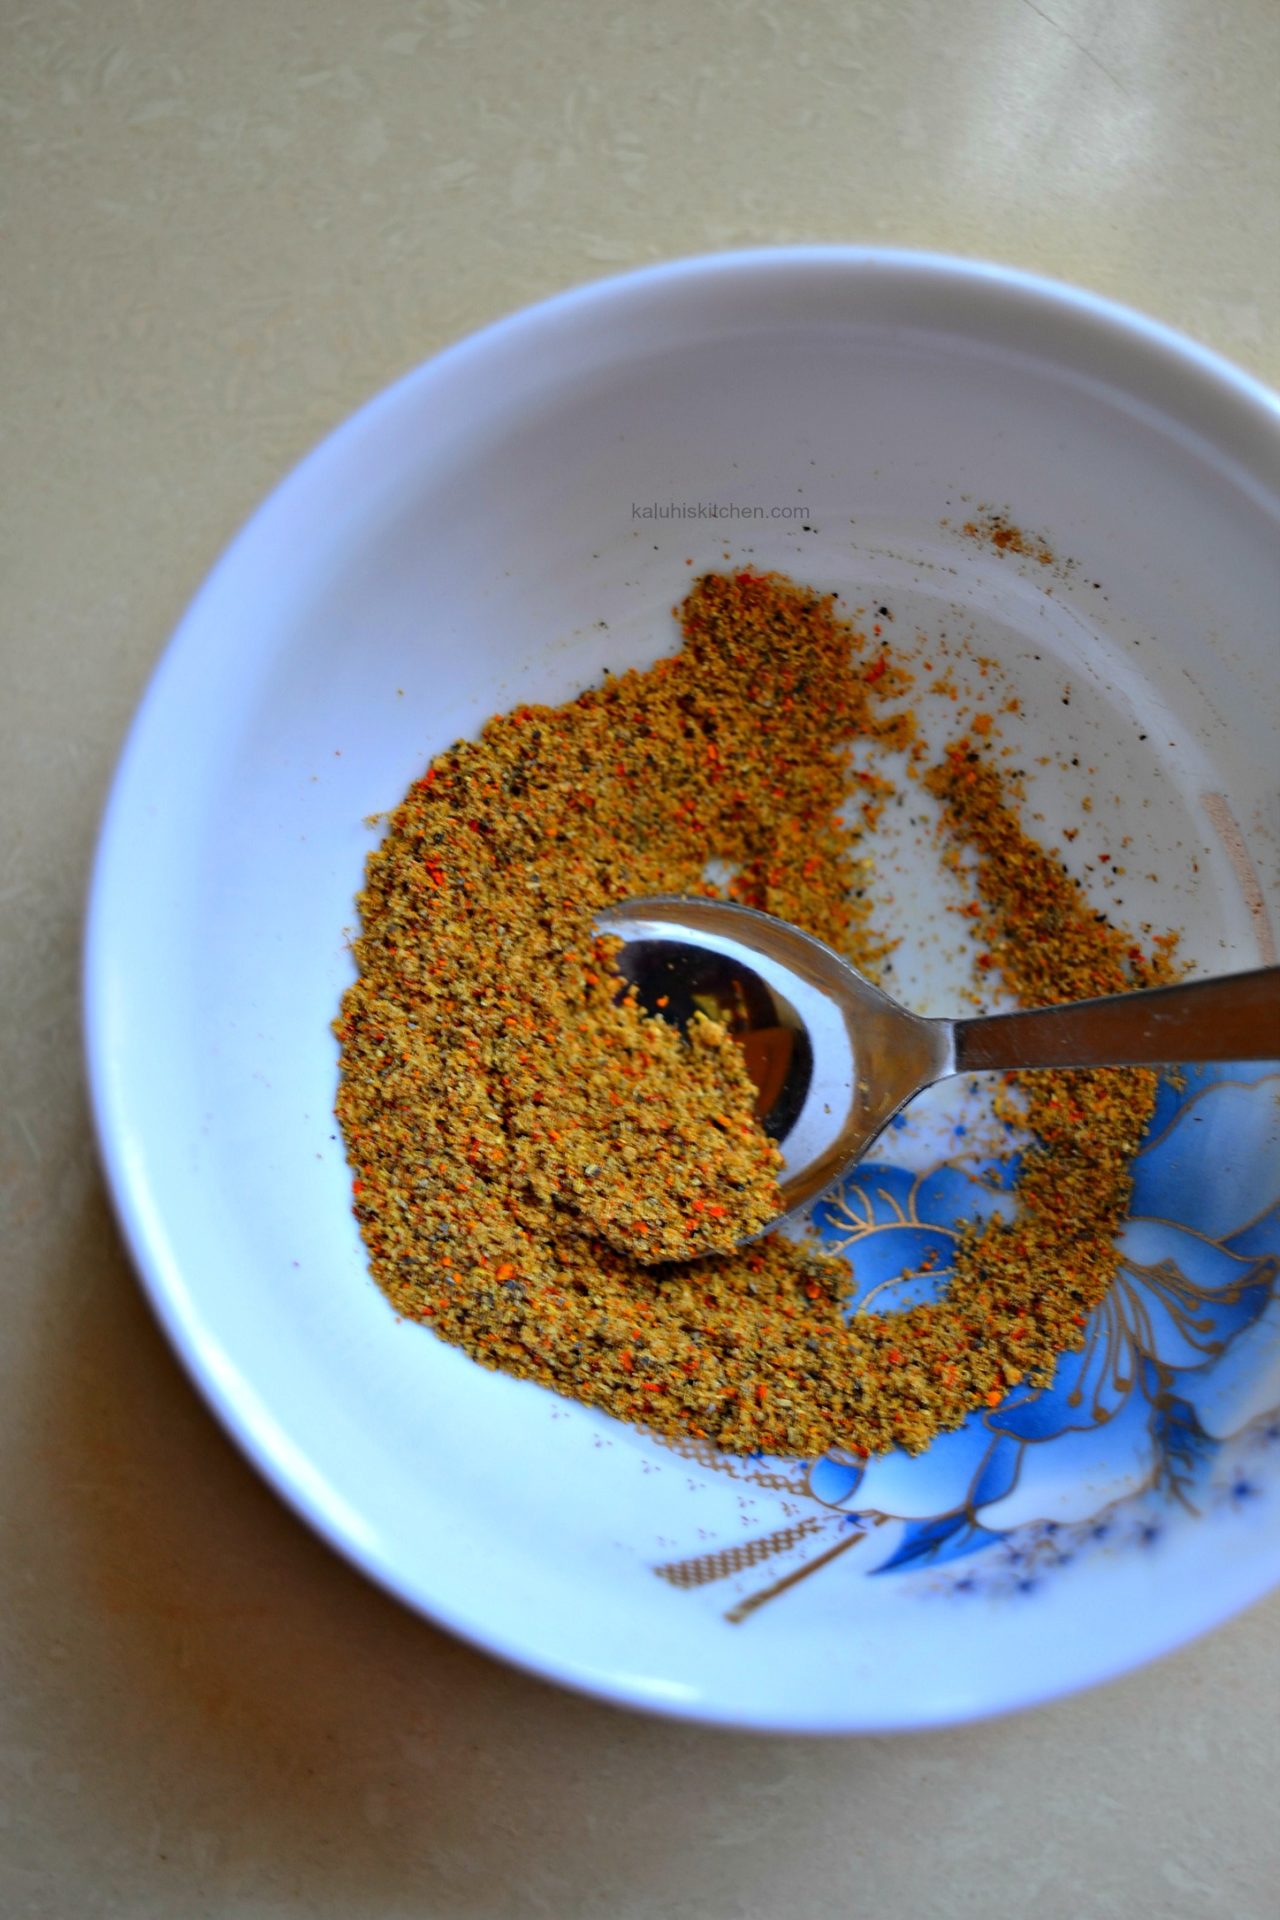 how to make a fish masala spice blend right at home_kaluhiskitchen.com